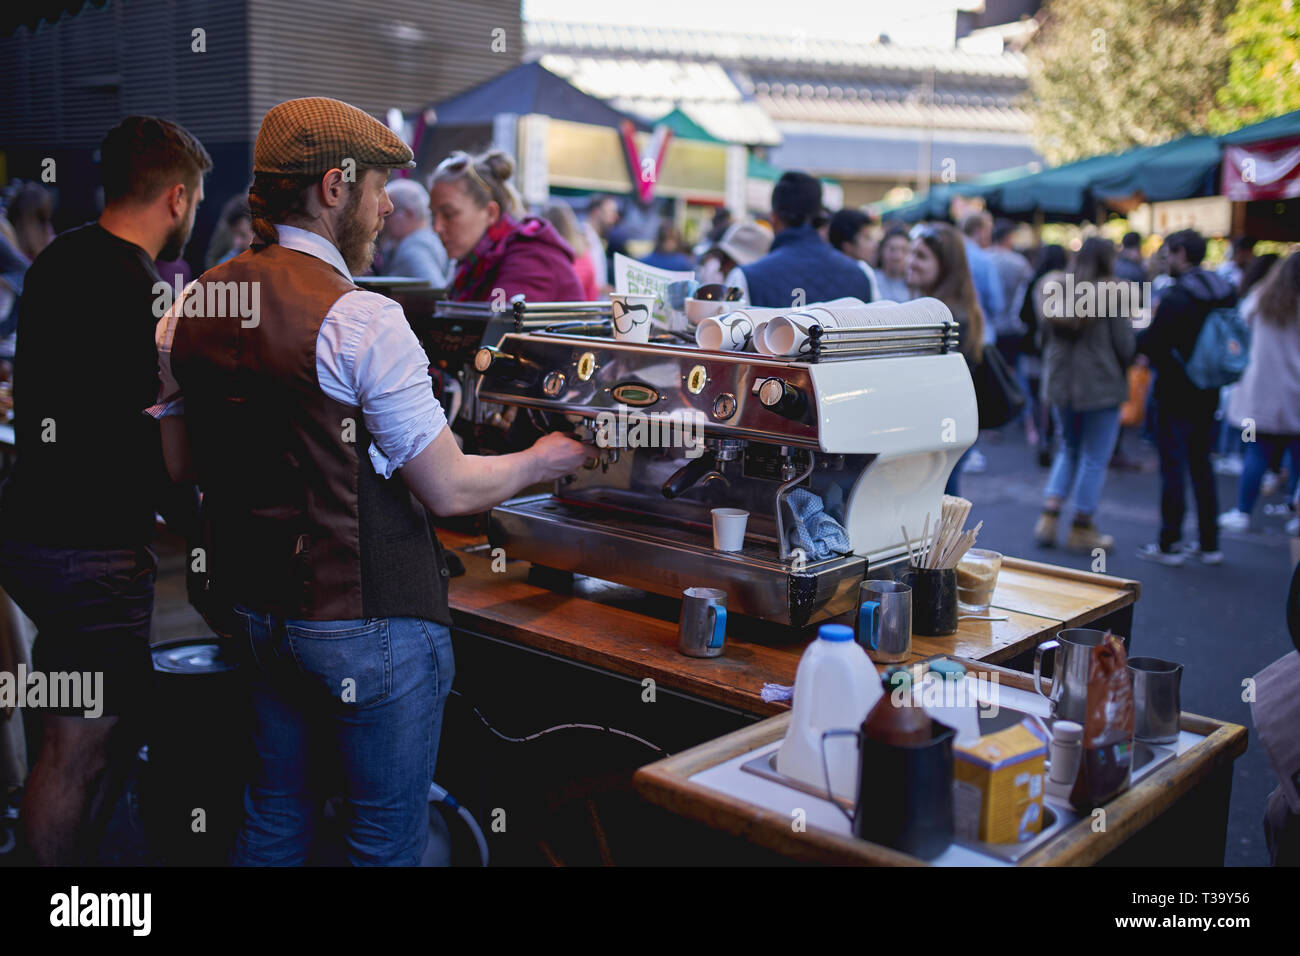 London, UK - November, 2018. Coffee stall in a crowded Borough Market, one of the oldest and largest food markets in London. Stock Photo